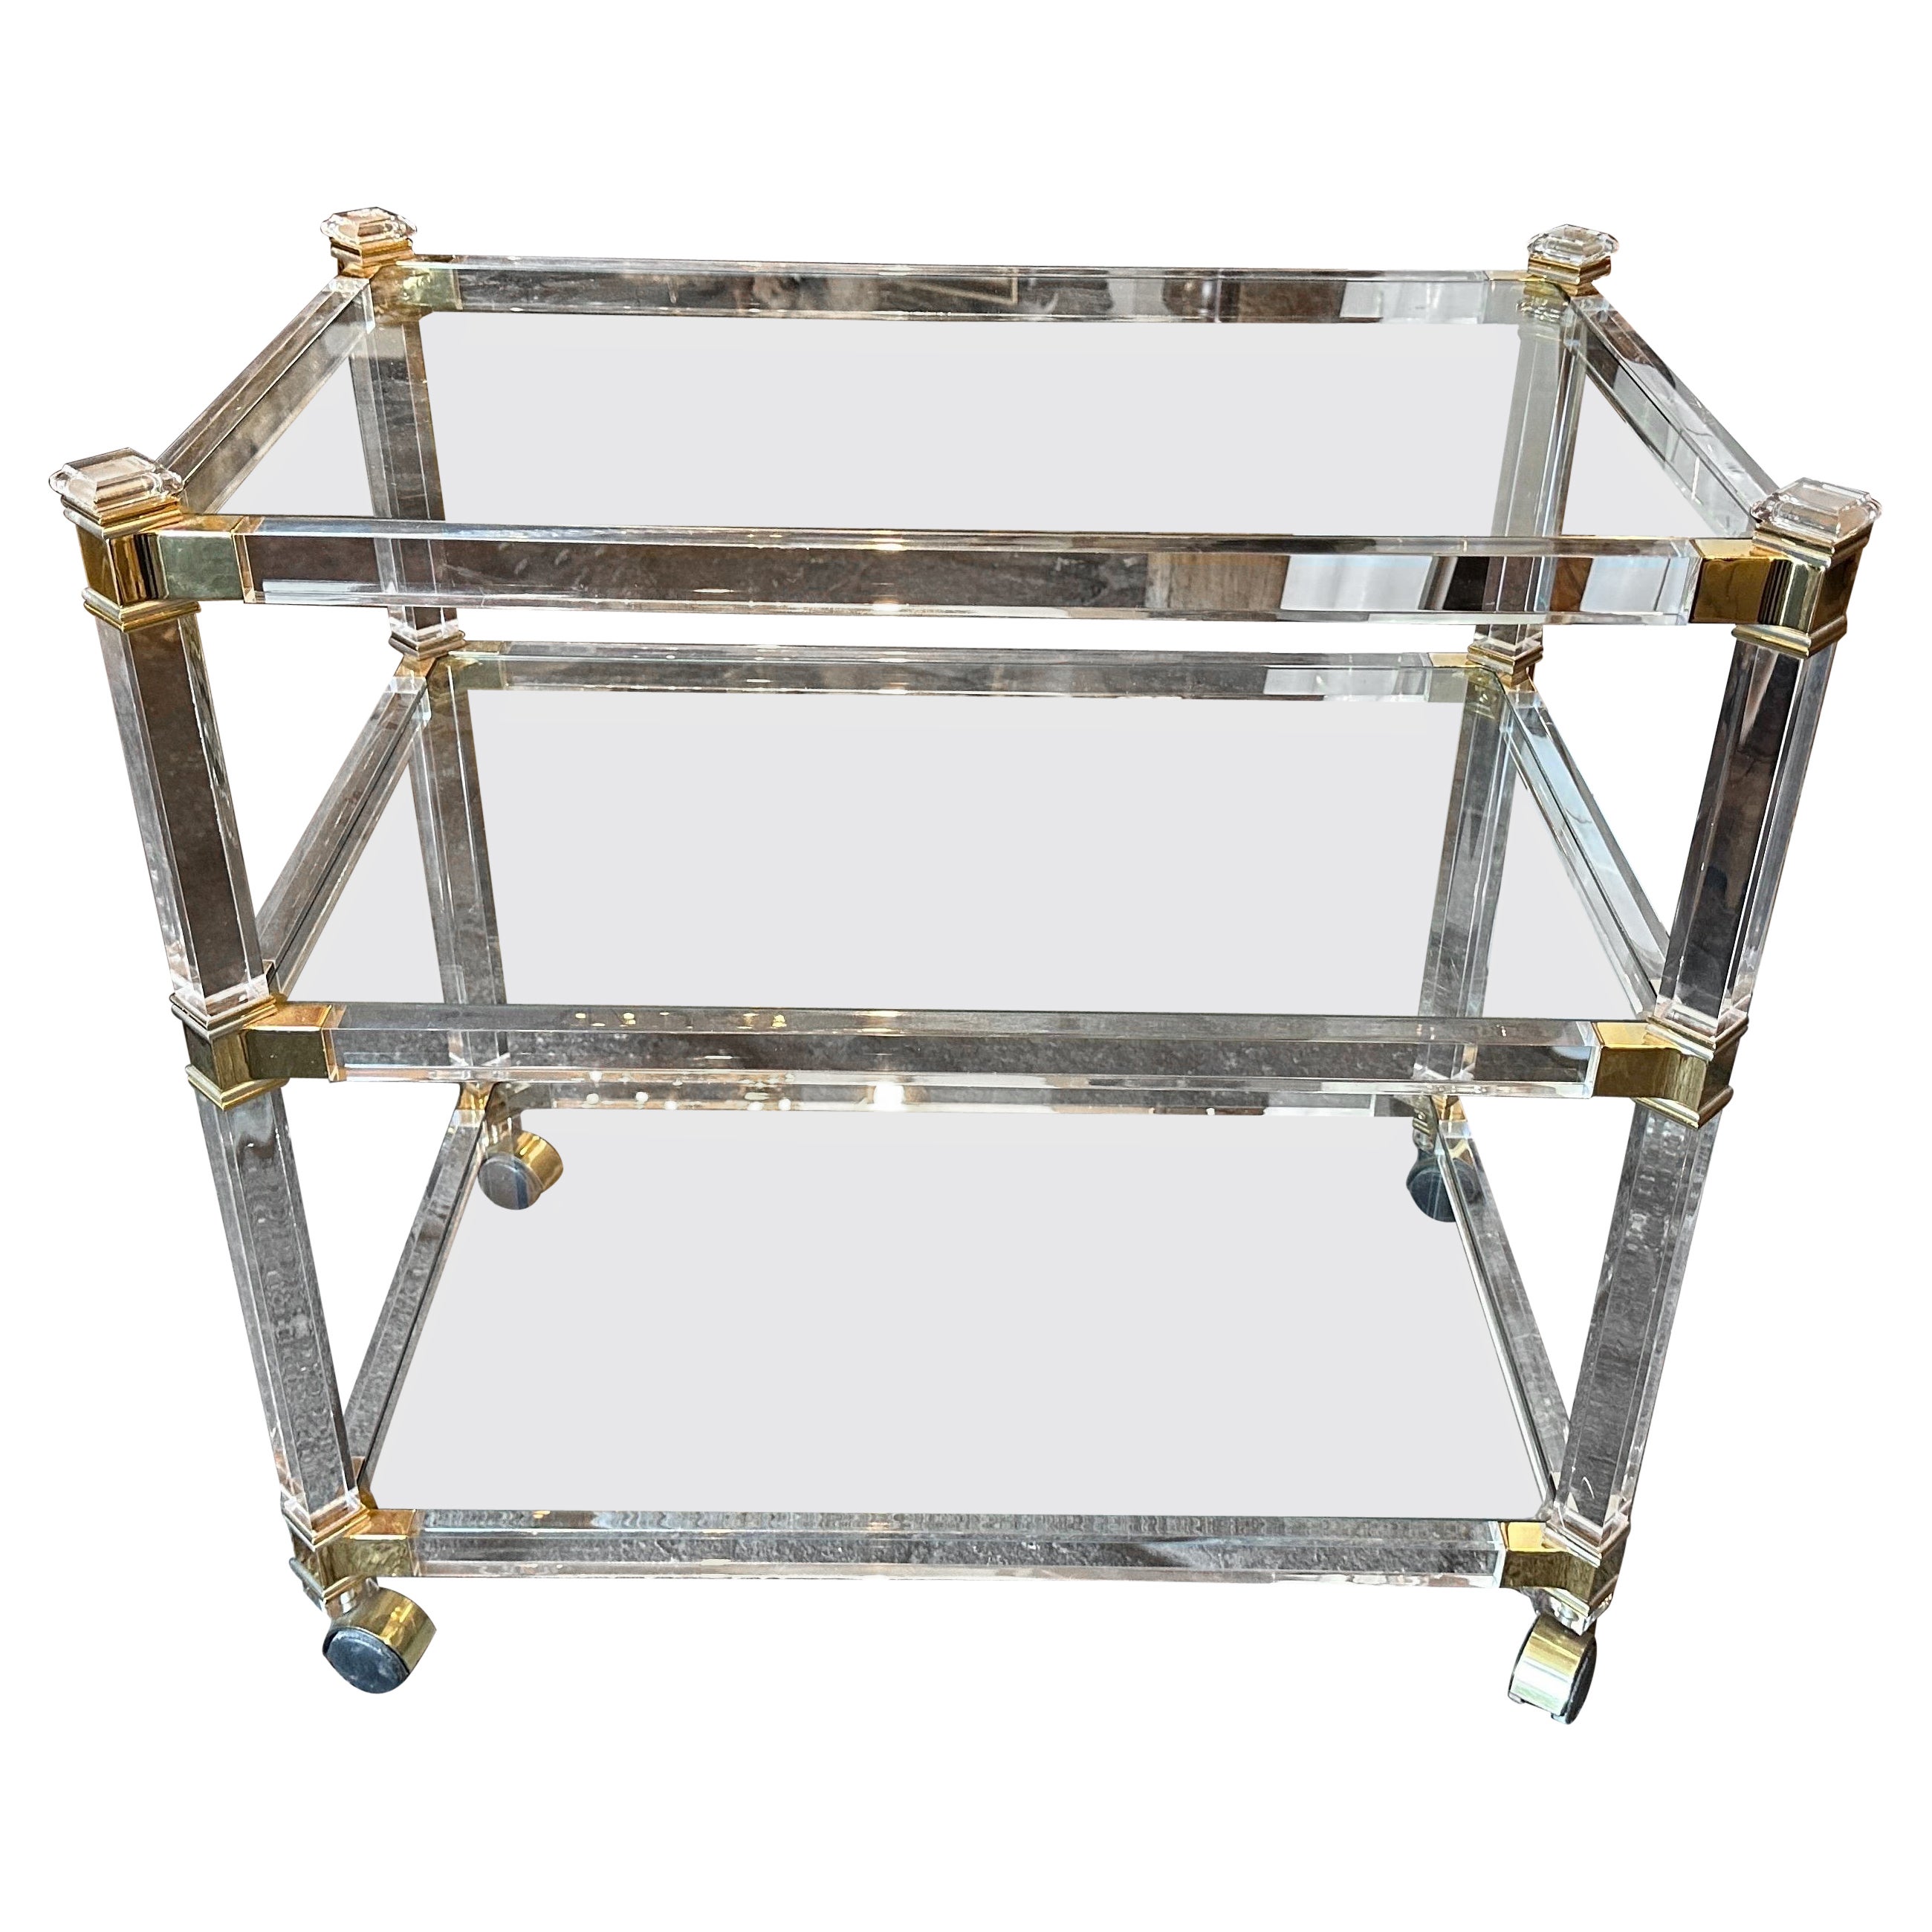 1980s Hollywood Regency Lucite and Brass Italian Bar Cart by Fratelli Orsenigo For Sale